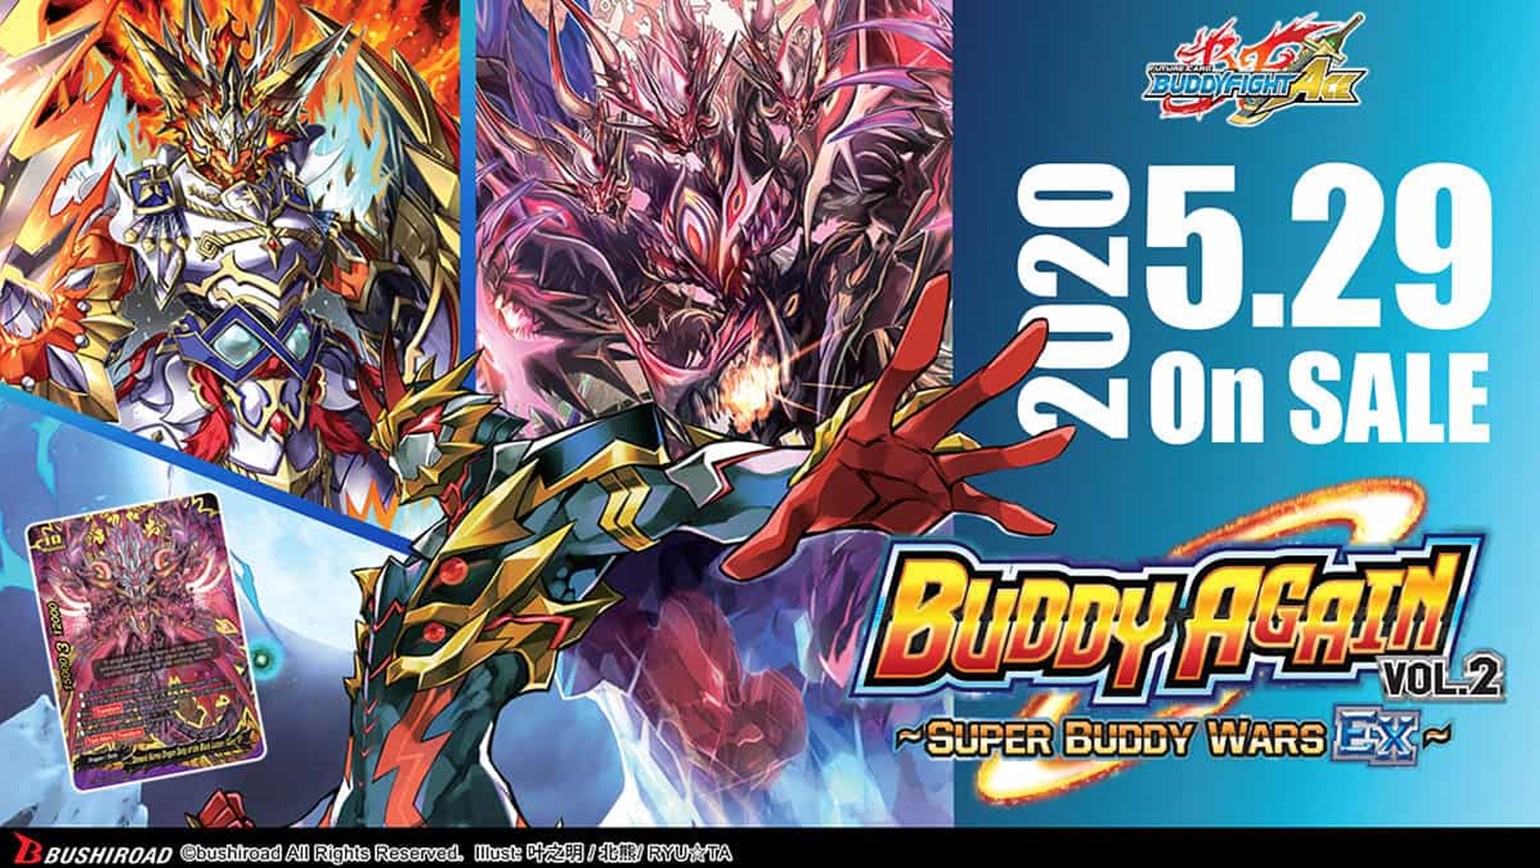 Future Card Buddyfight Ace Ultimate Booster Vol. 5 Buddy Again Vol. 2 ~Super Buddy Wars EX~ Coming May 29th